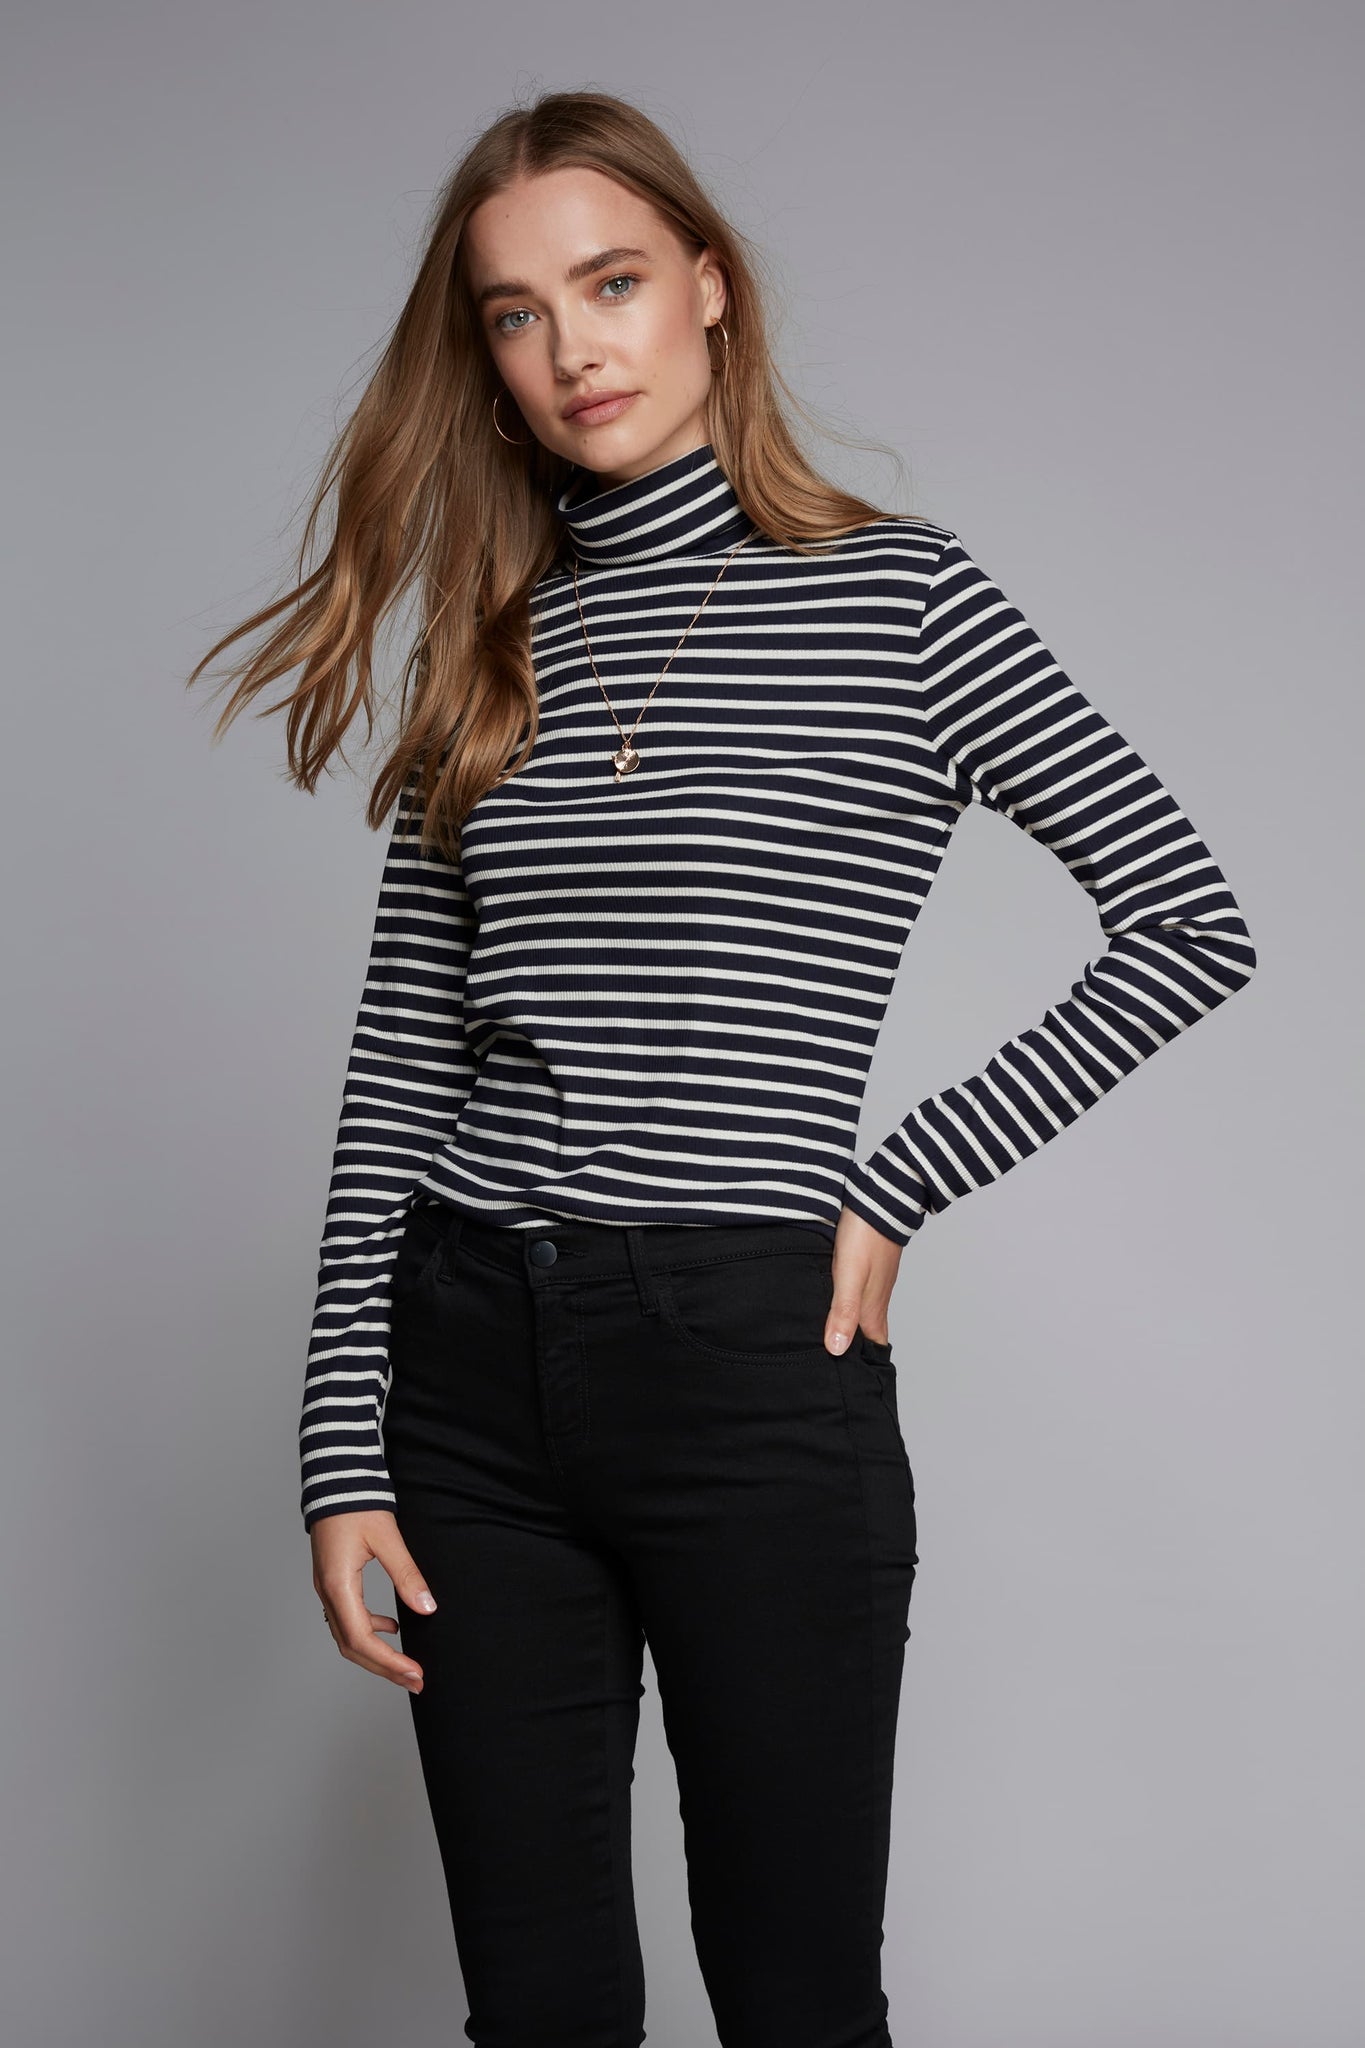 Striped Cotton Roll Neck Top in Navy and Ecru - Women's Long Sleeve Roll Neck Top - Quality Roll Neck Top - by Lavender Hill Clothing